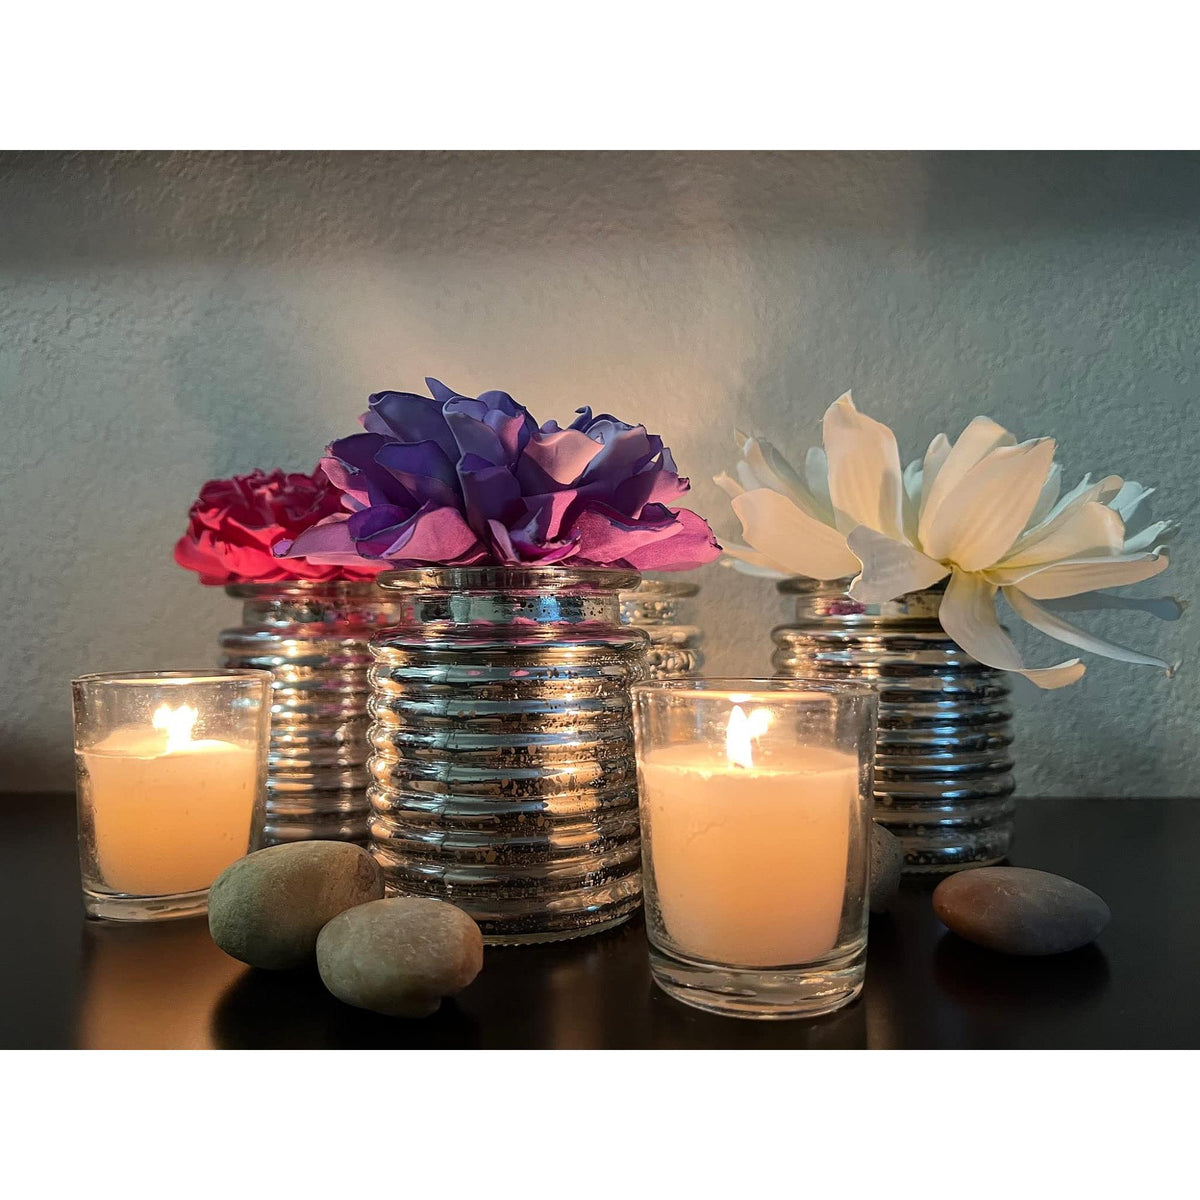 HOSLEY®  Glass Tealight Candle Holder, Silver Finish, Set of 4, 3.54 inches High each